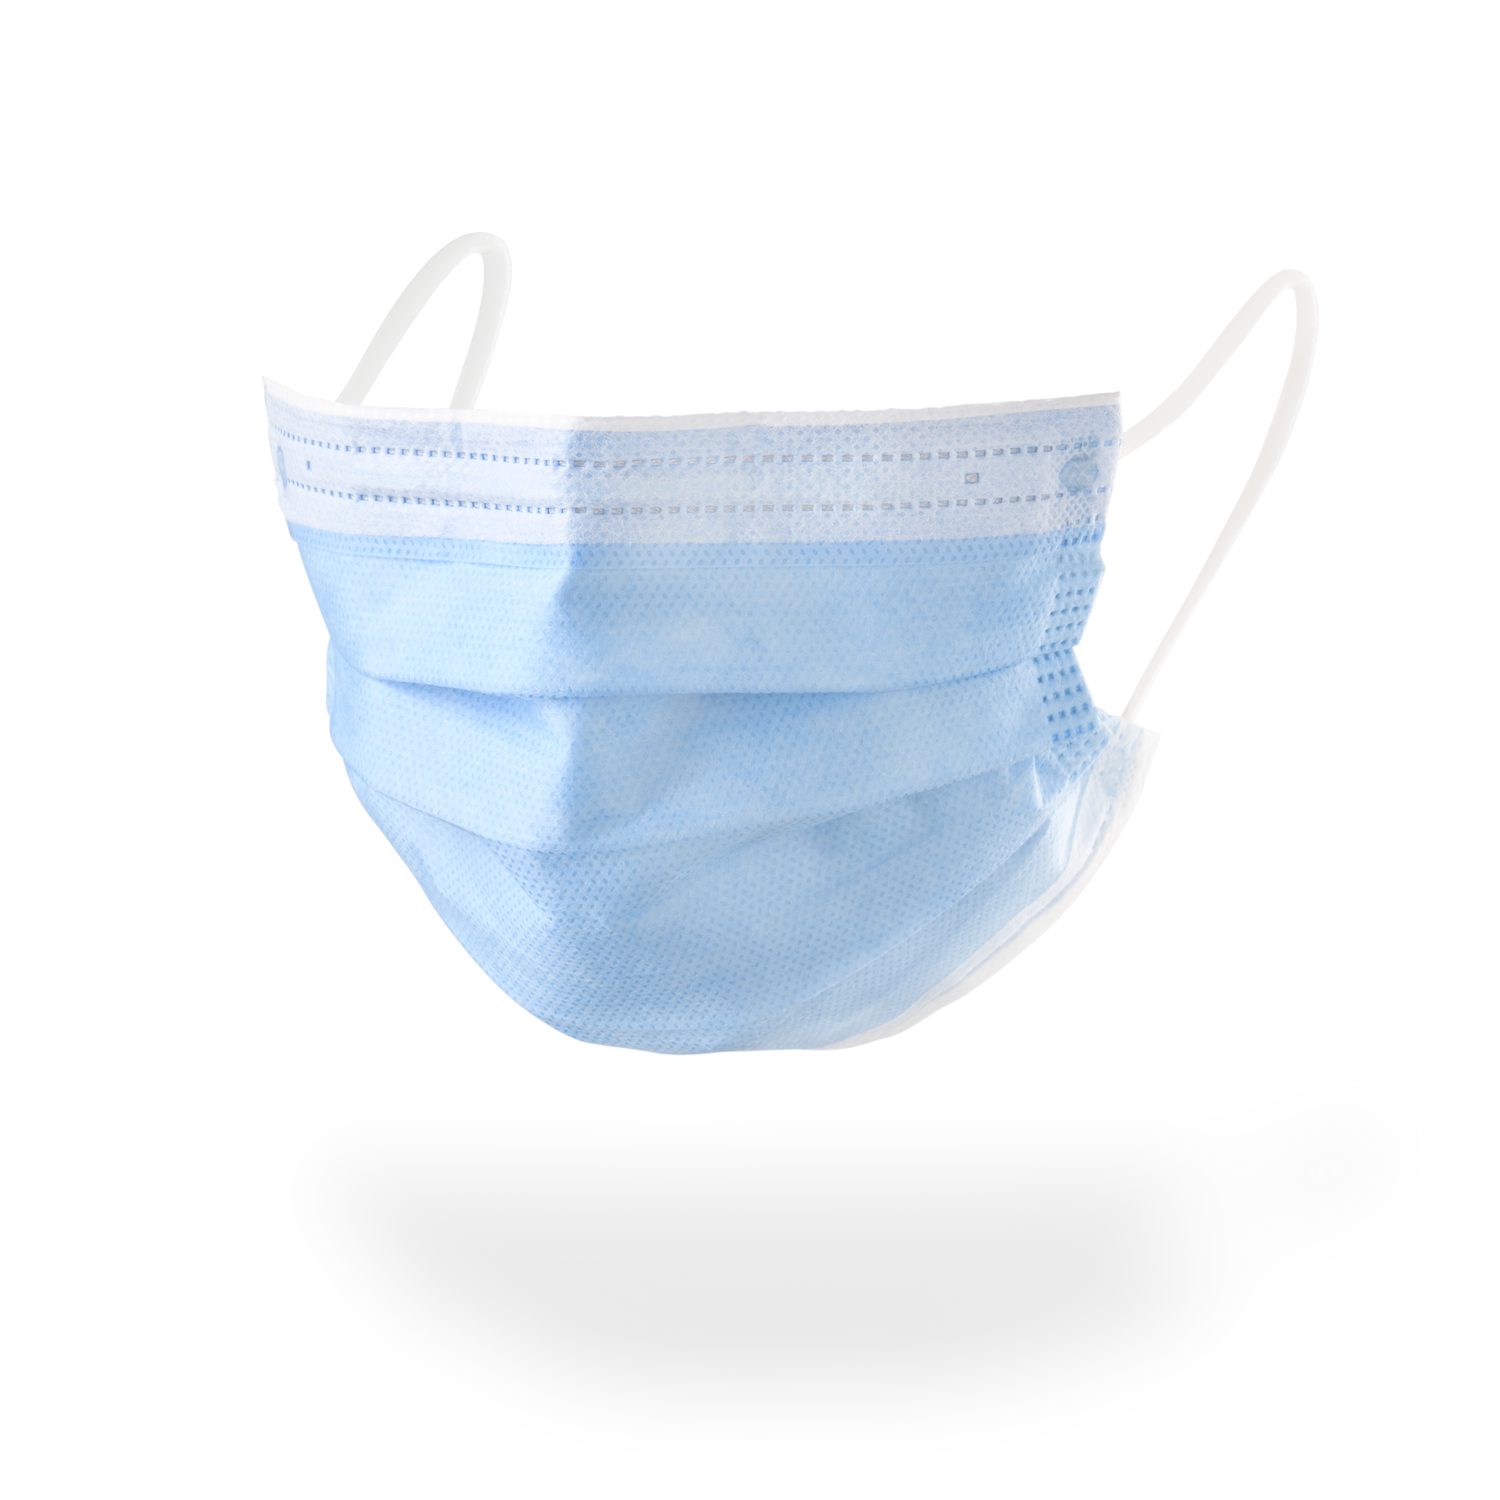 LEVEL 3 SURGICAL FACE MASK